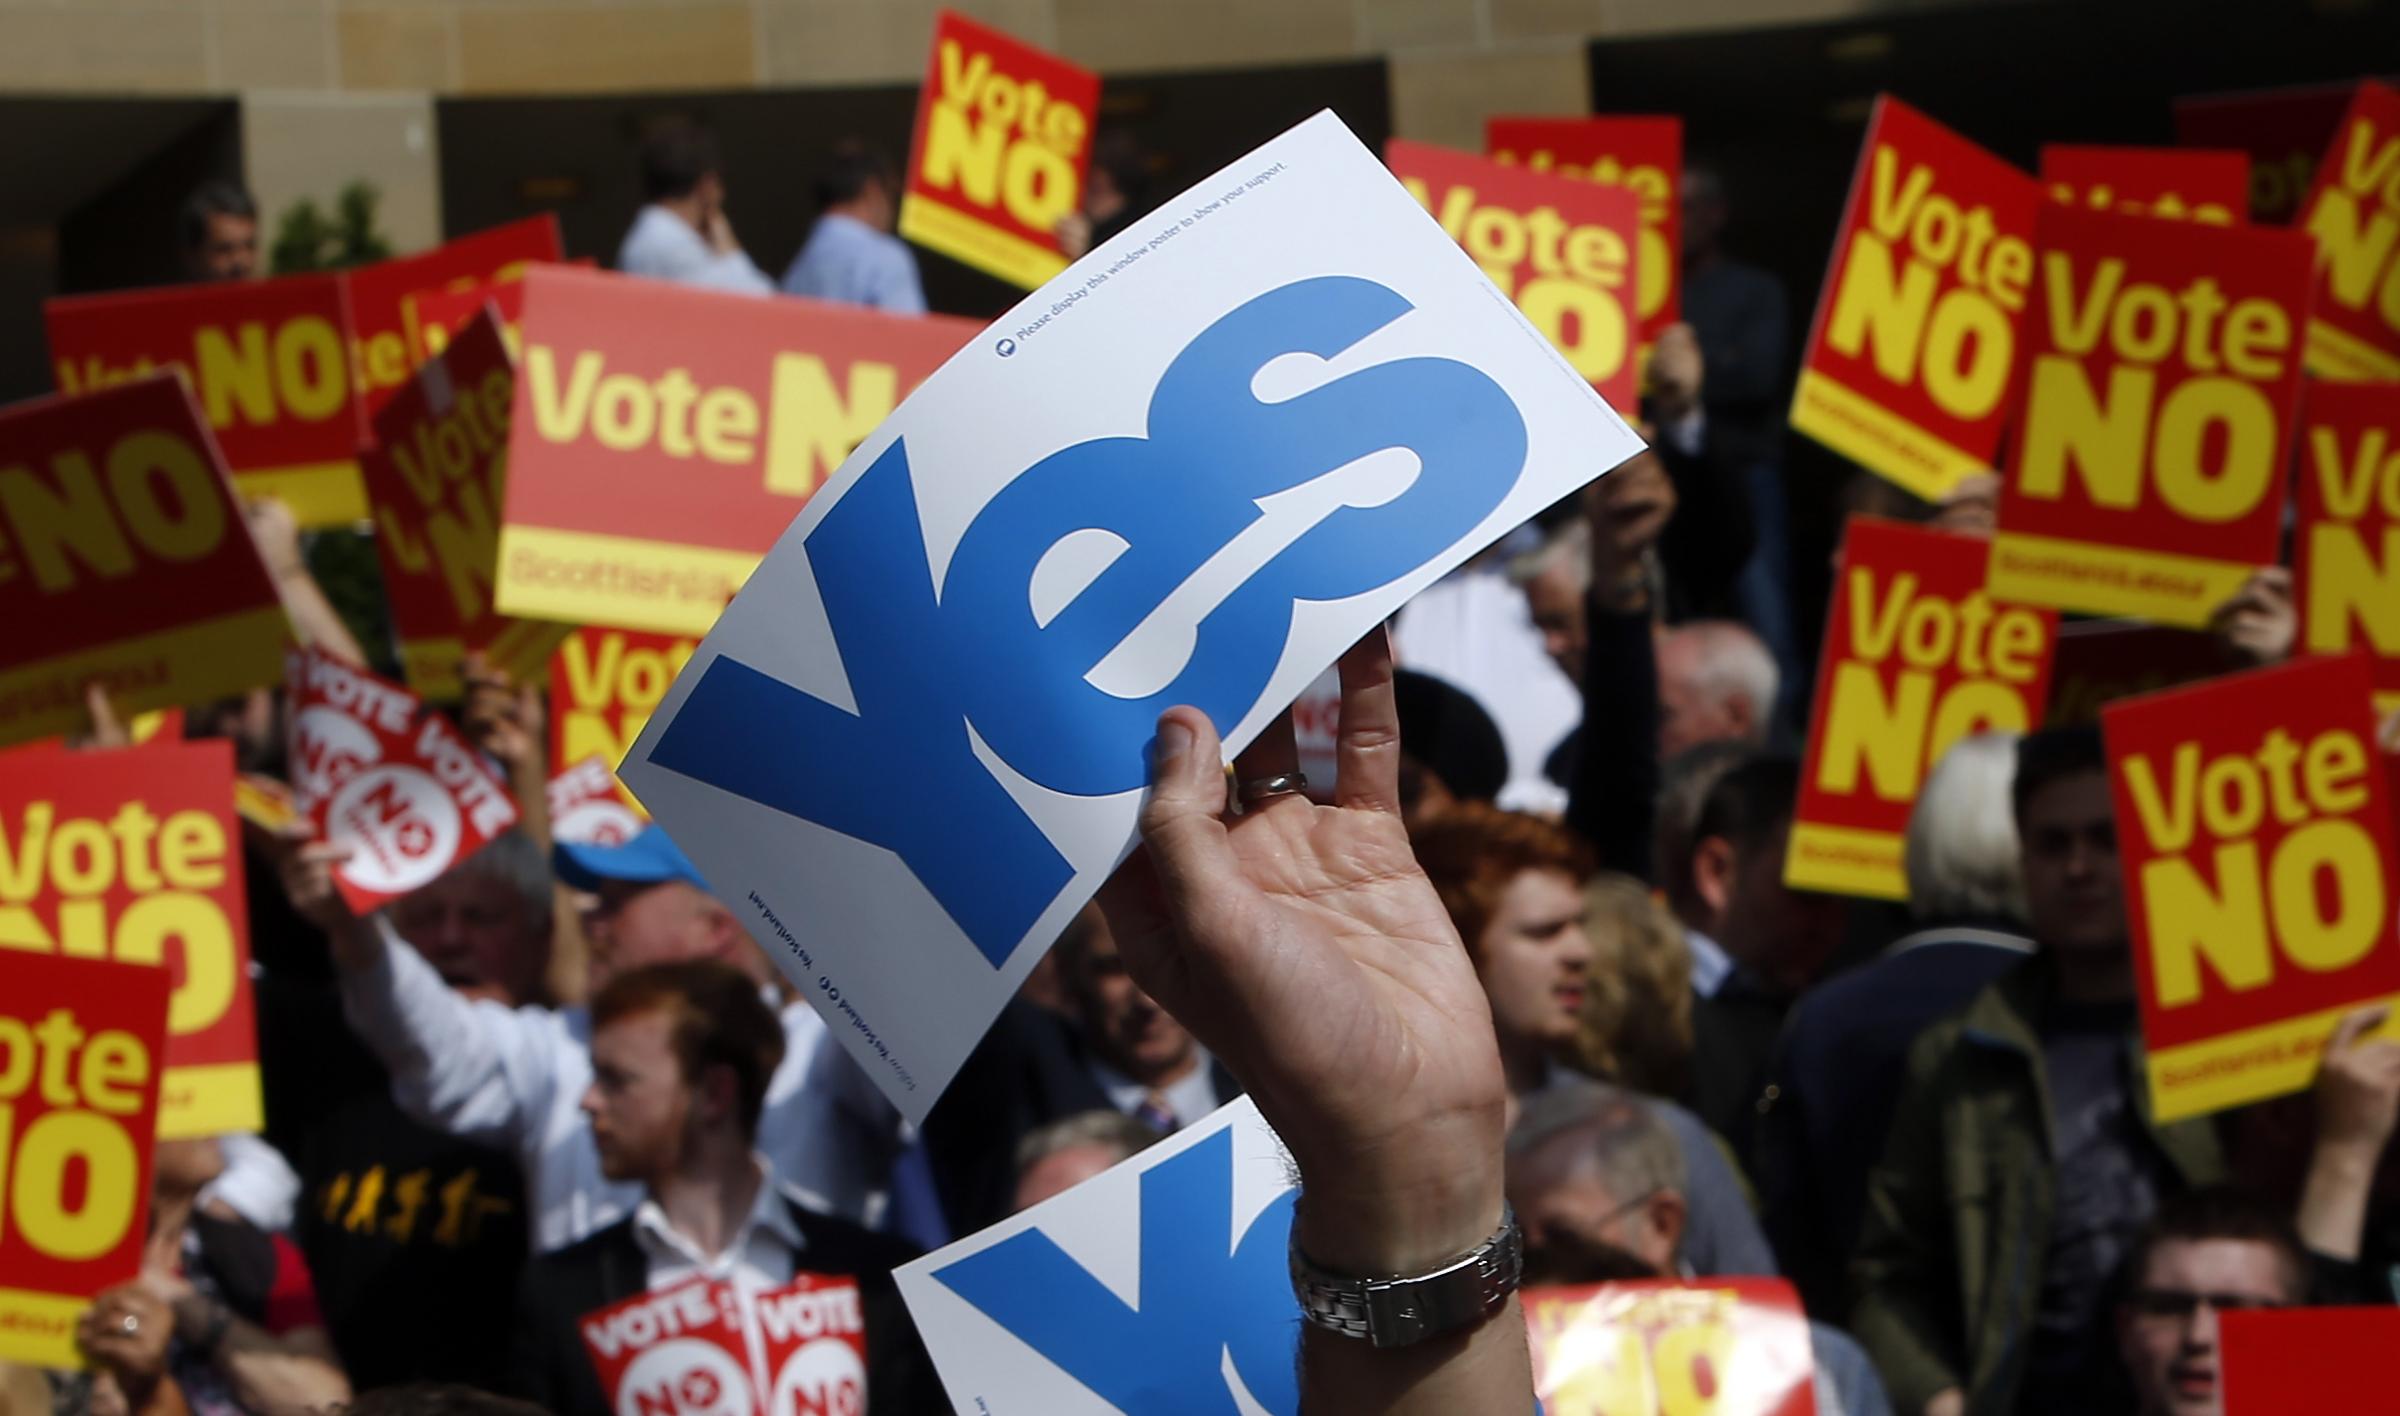 Scottish Independence: How have Scots said they would vote in recent polls